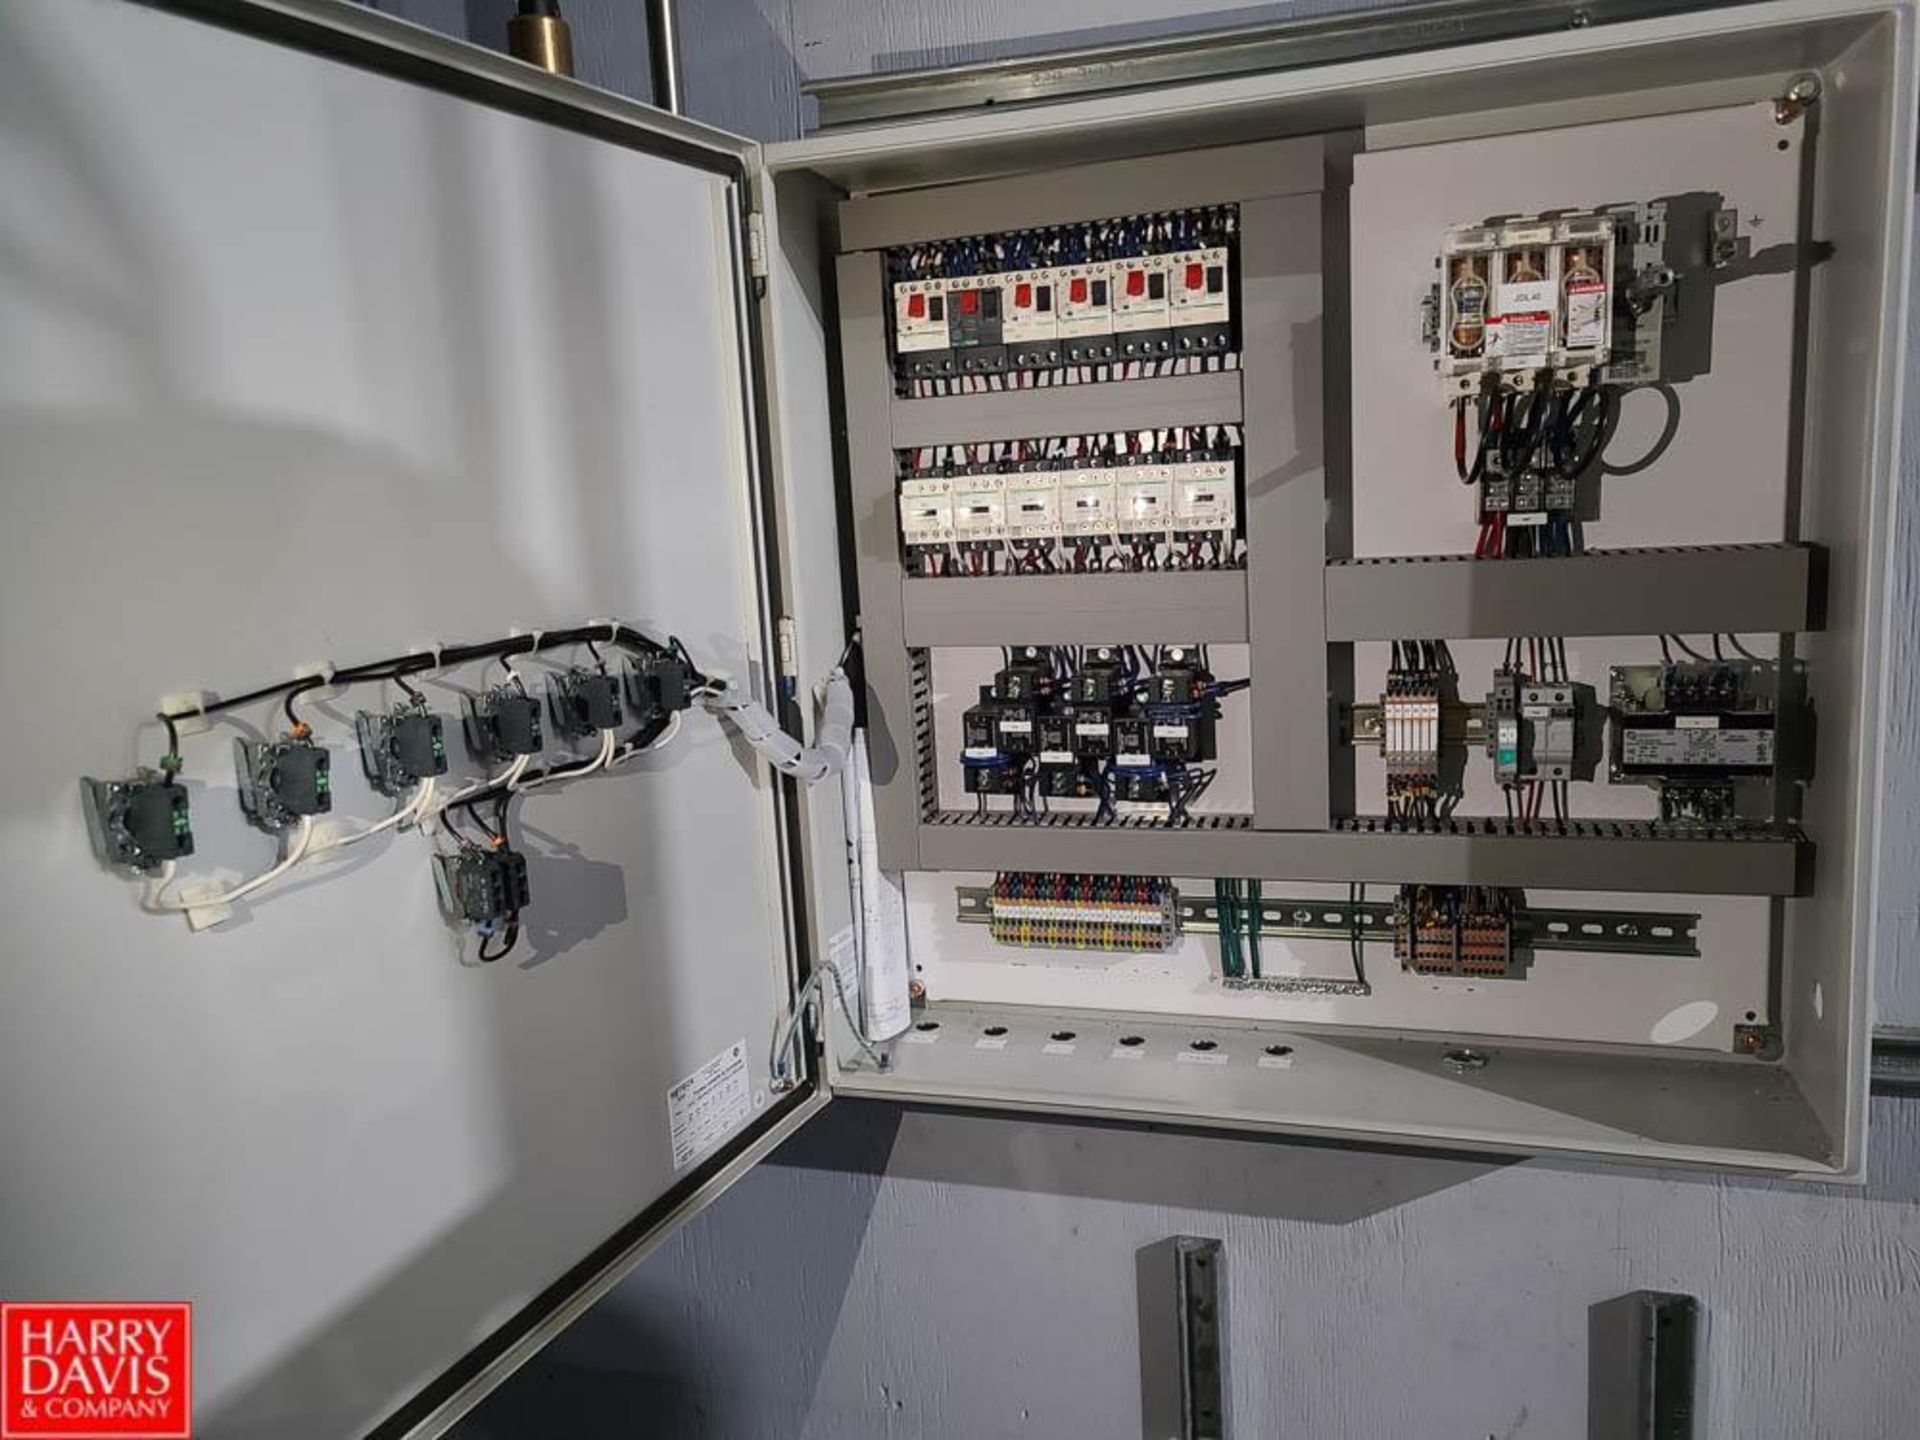 2021 Soteck Control Panel with Relays and Fuses - Rigging Fee: $125